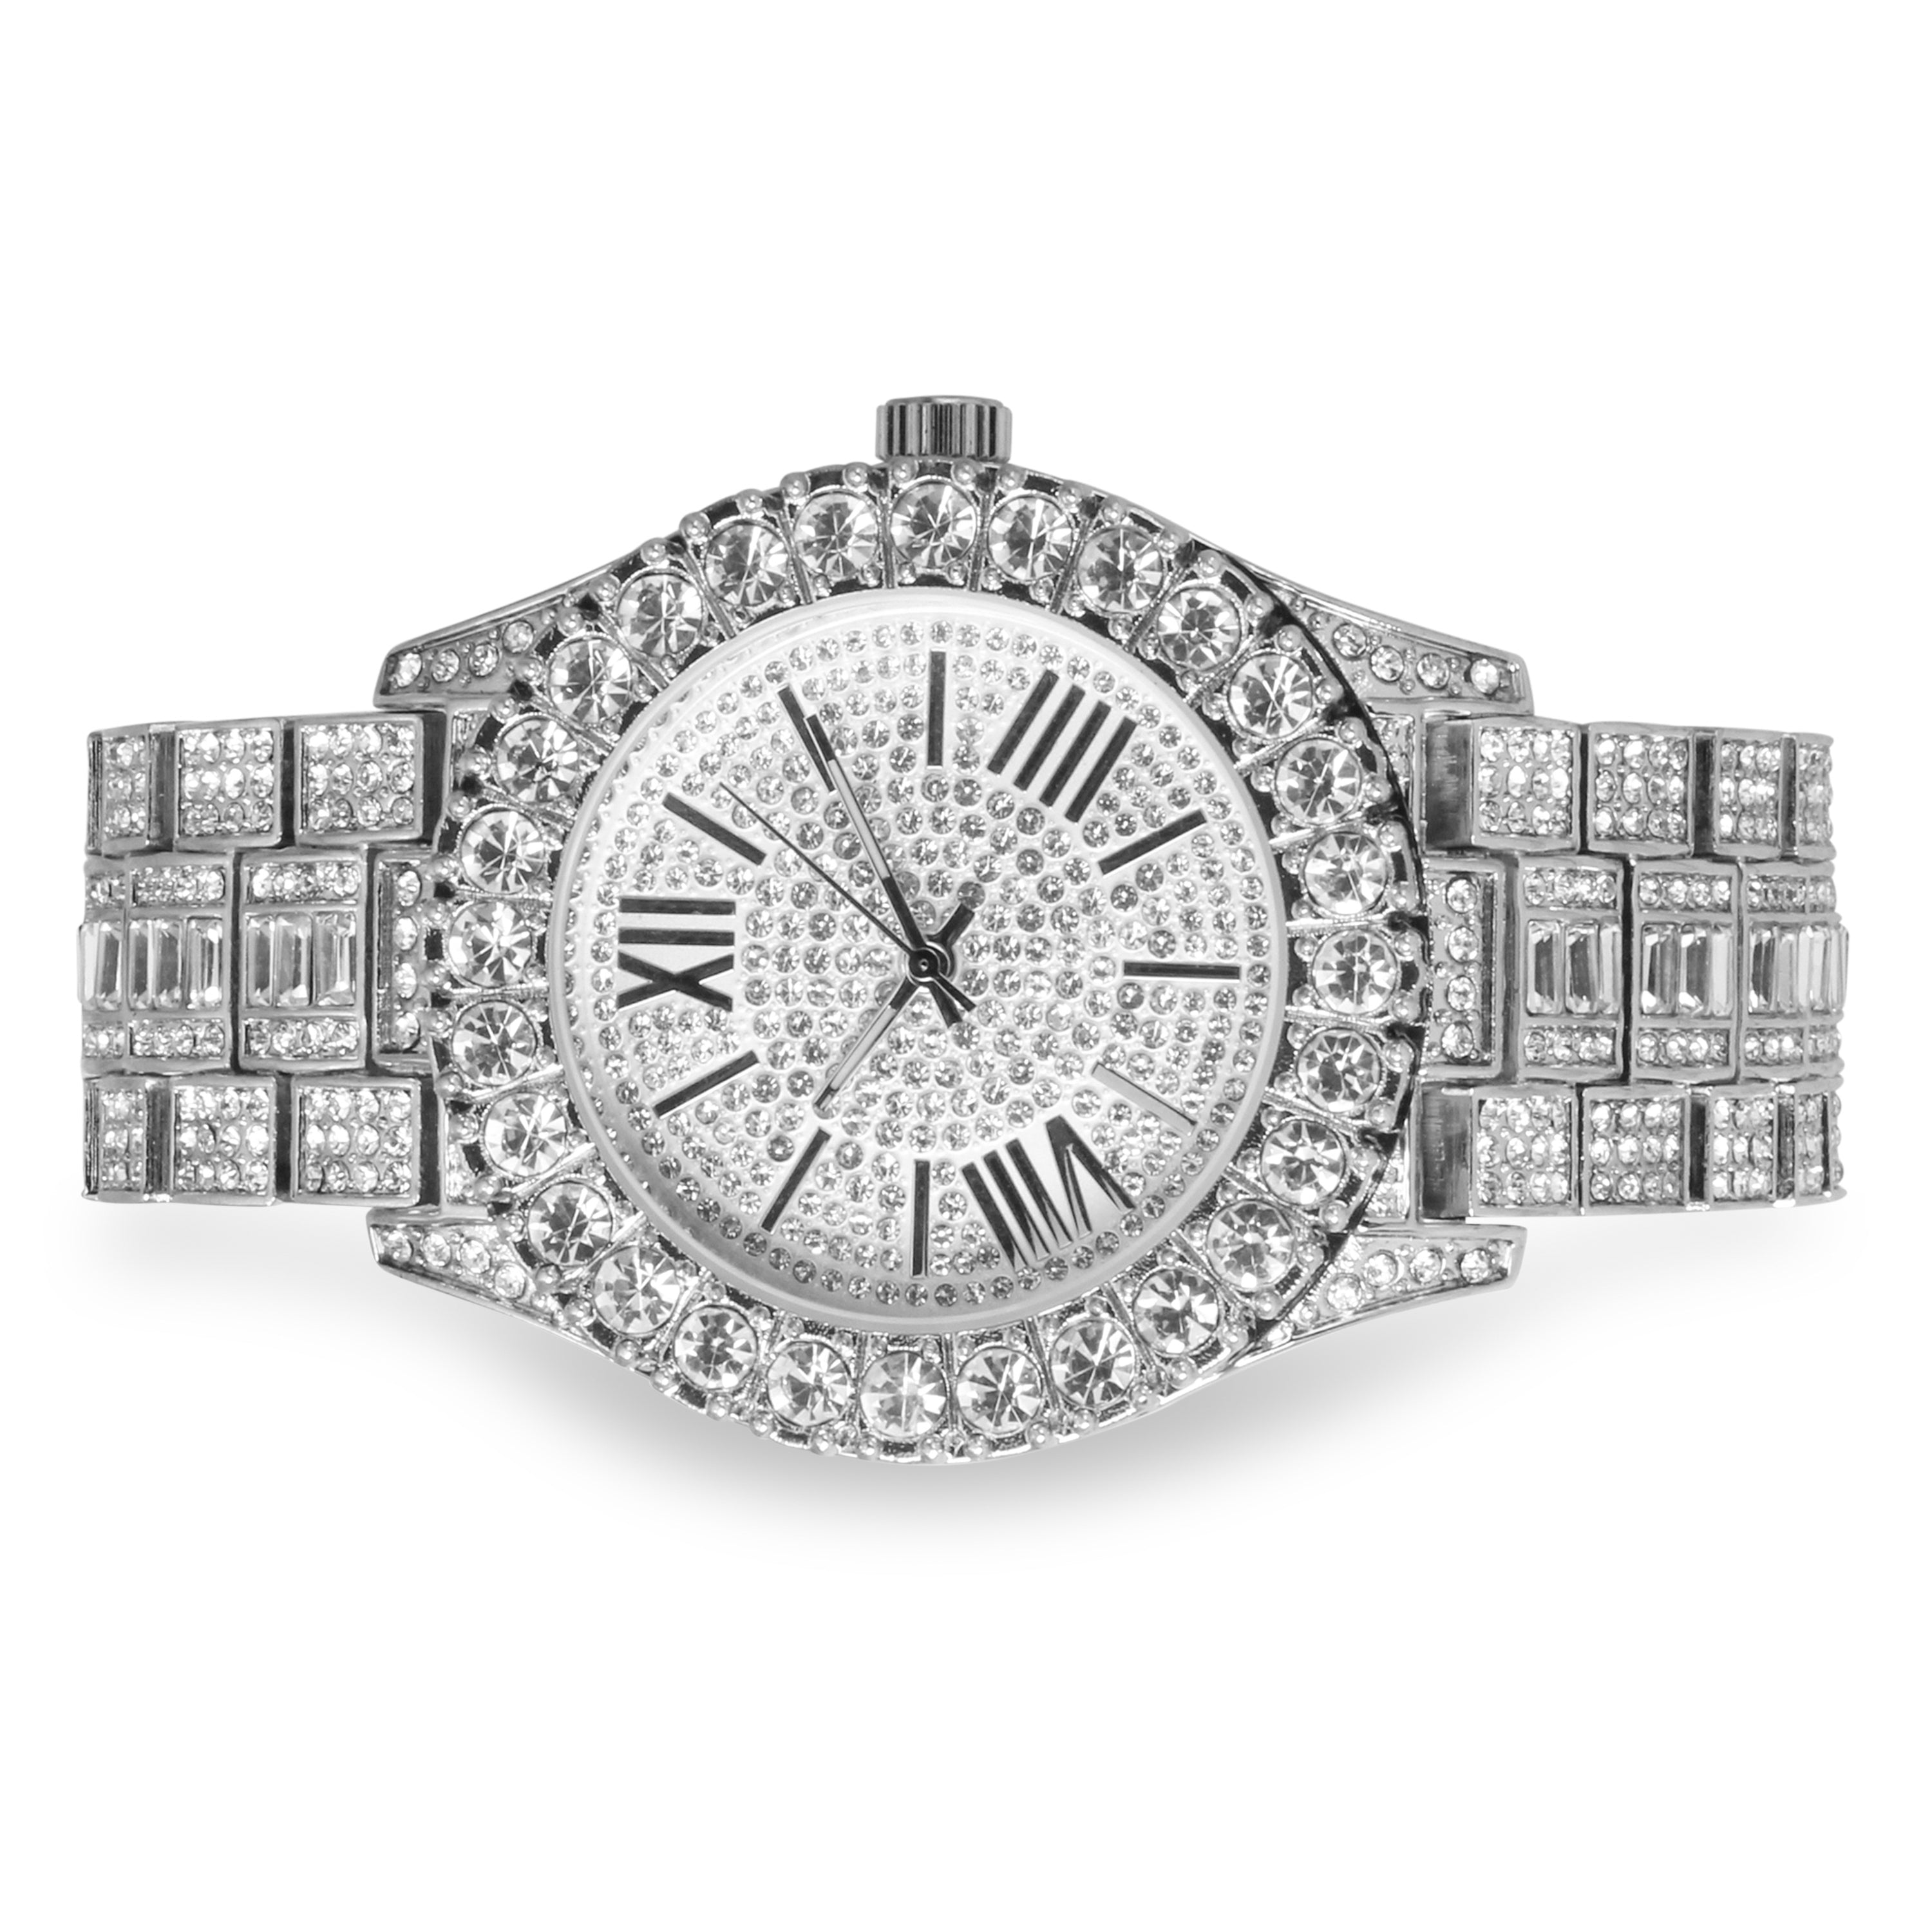 Men's Round Roman Dial Watch 43mm Silver - "Fully Iced Band"